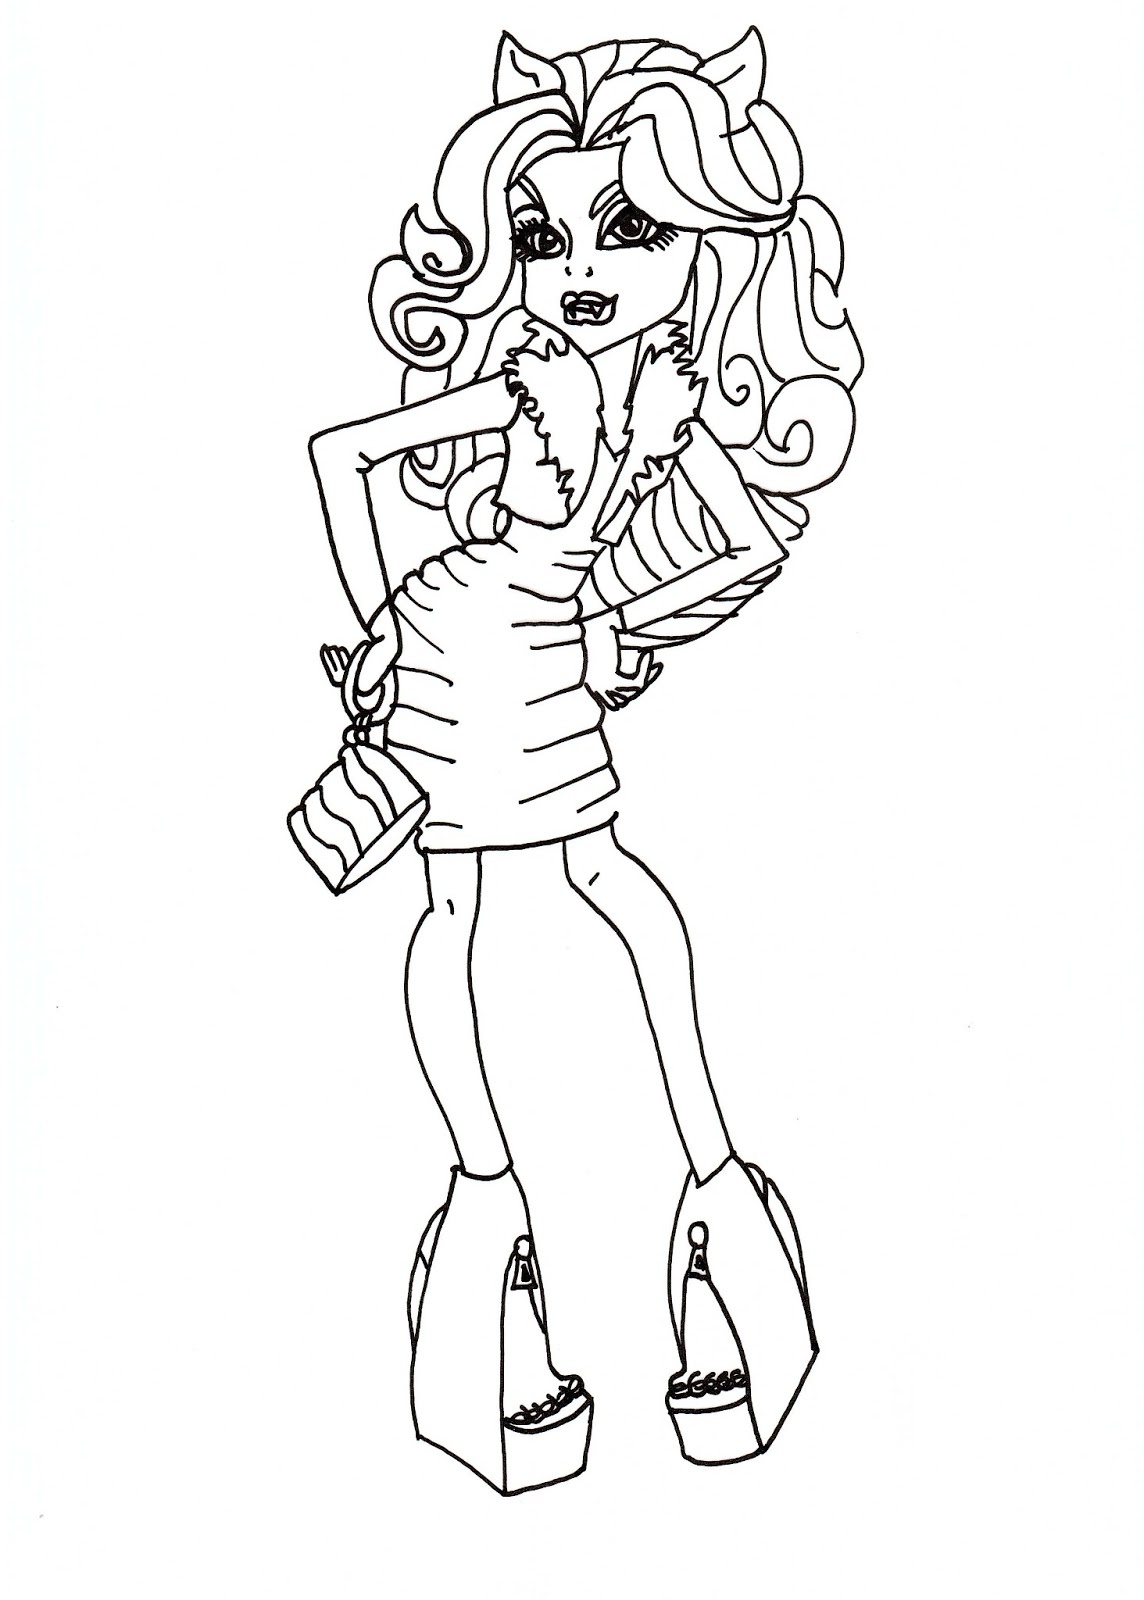 Free Printable Monster High Coloring Pages: Clawdeen Wolf Fashion